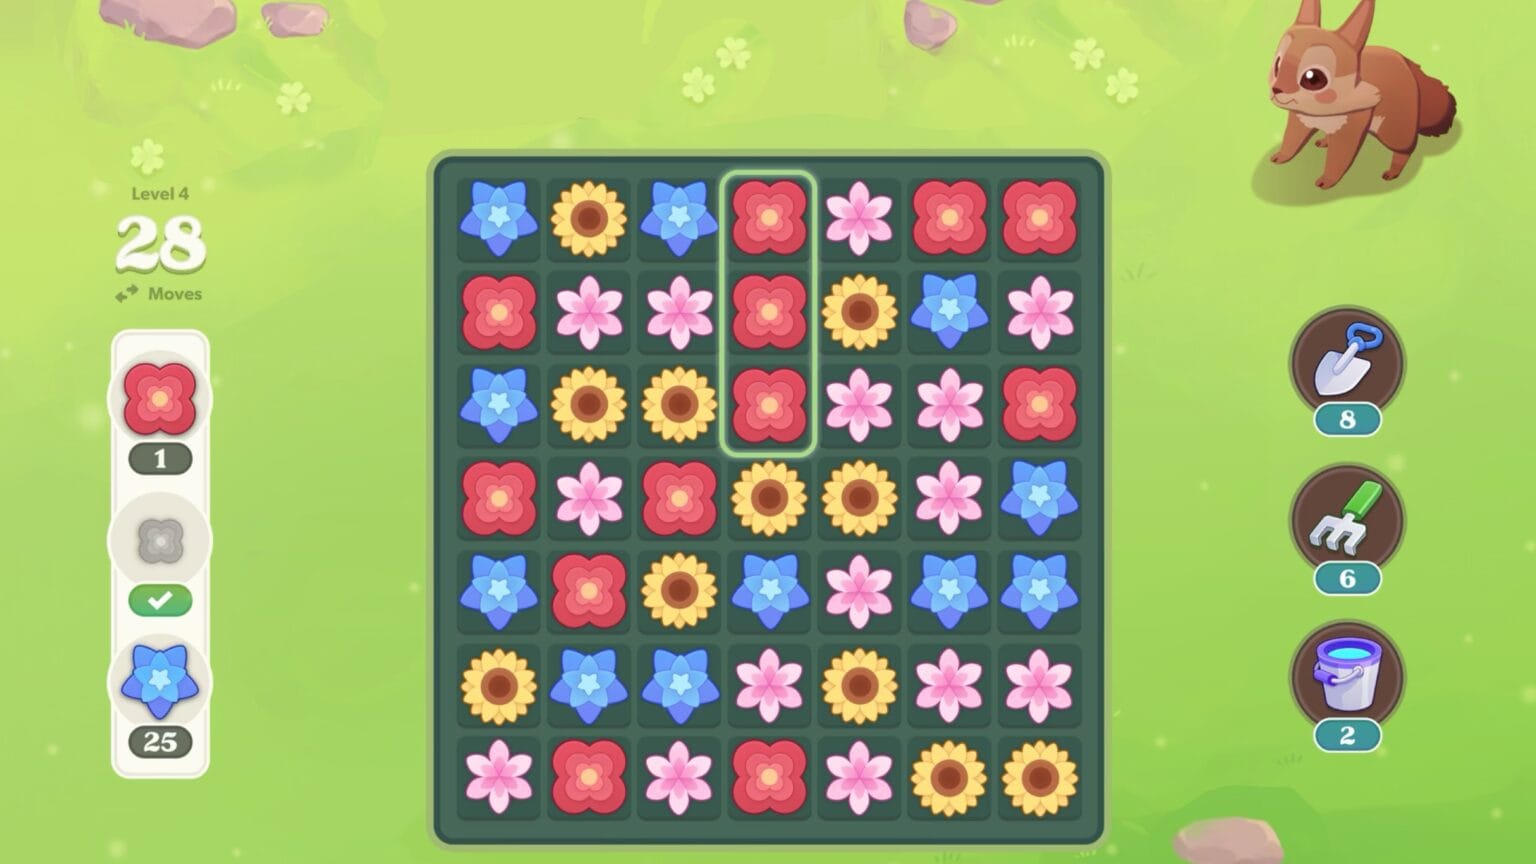 New Apple Arcade game 'Garden Tails' is painfully cute